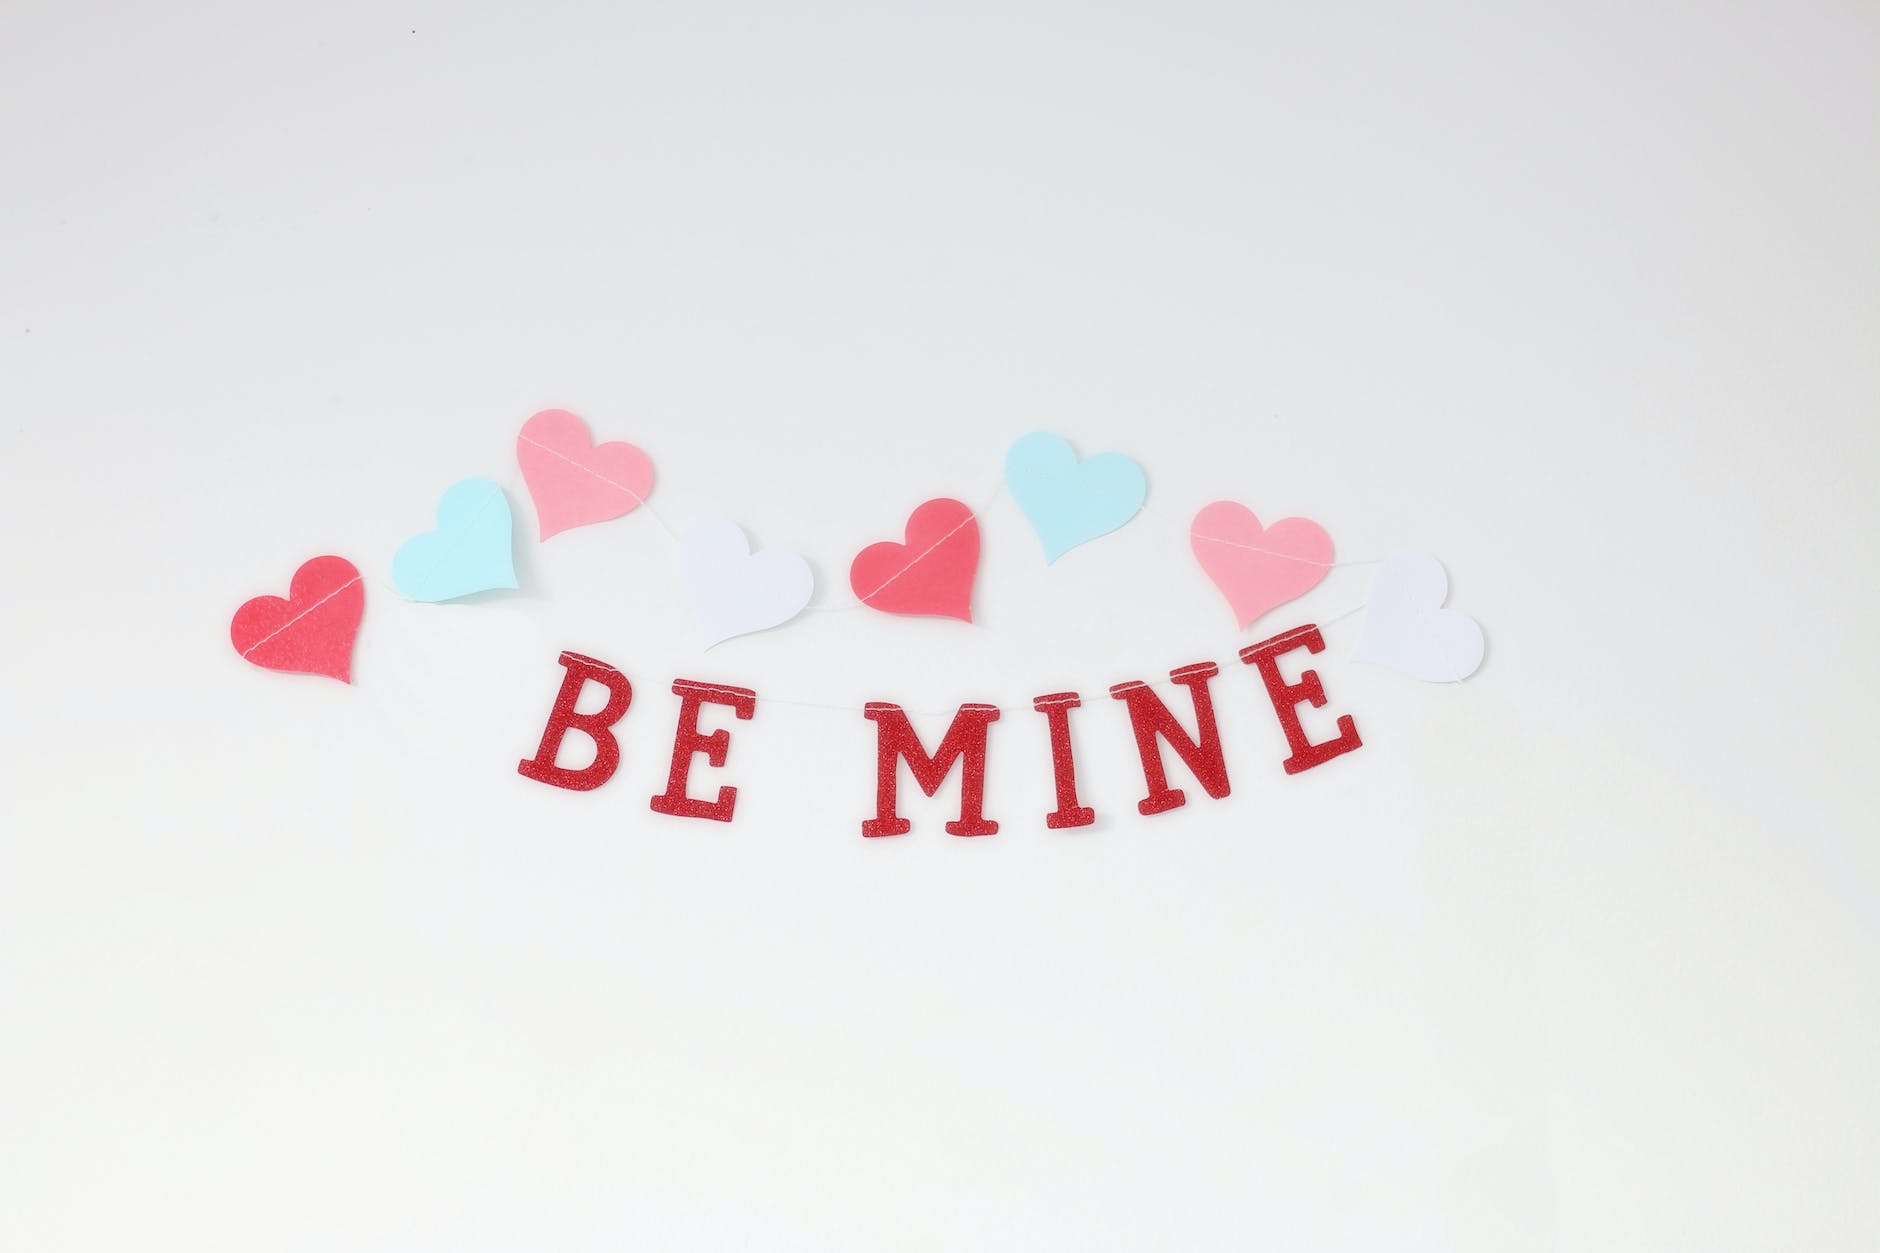 be mine stickers, People, Business, Love, 7 good acts, Good Character